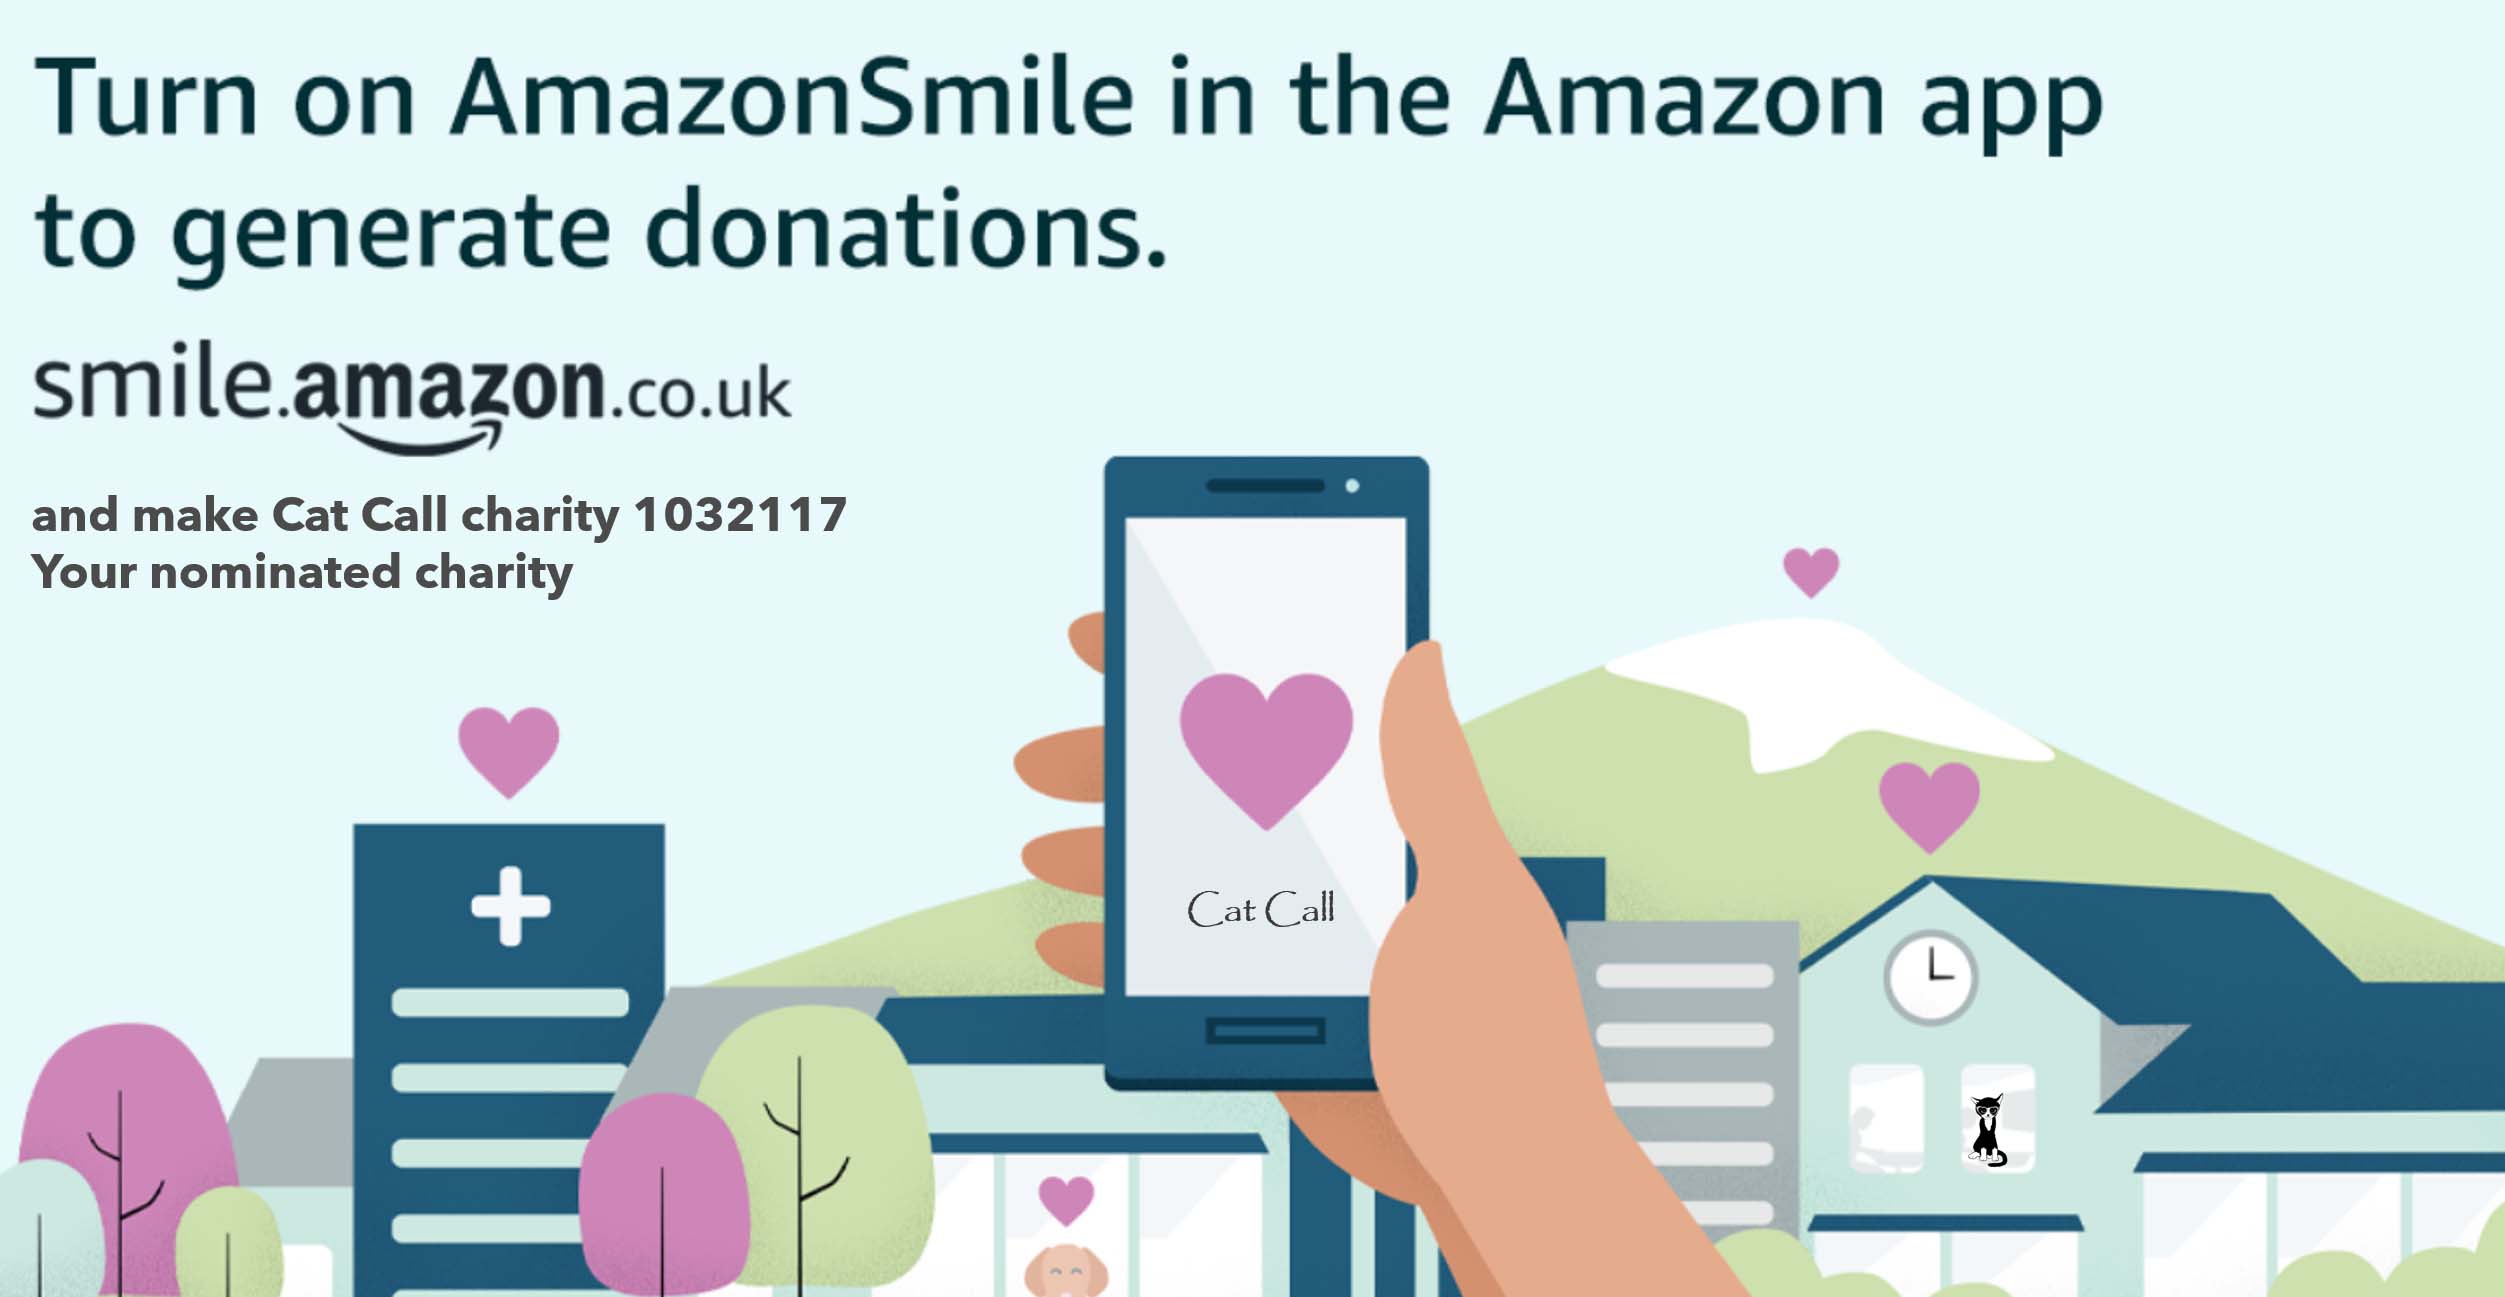 Good news! AmazonSmile is now available in the Amazon Shopping app on iPhones and Android phones.